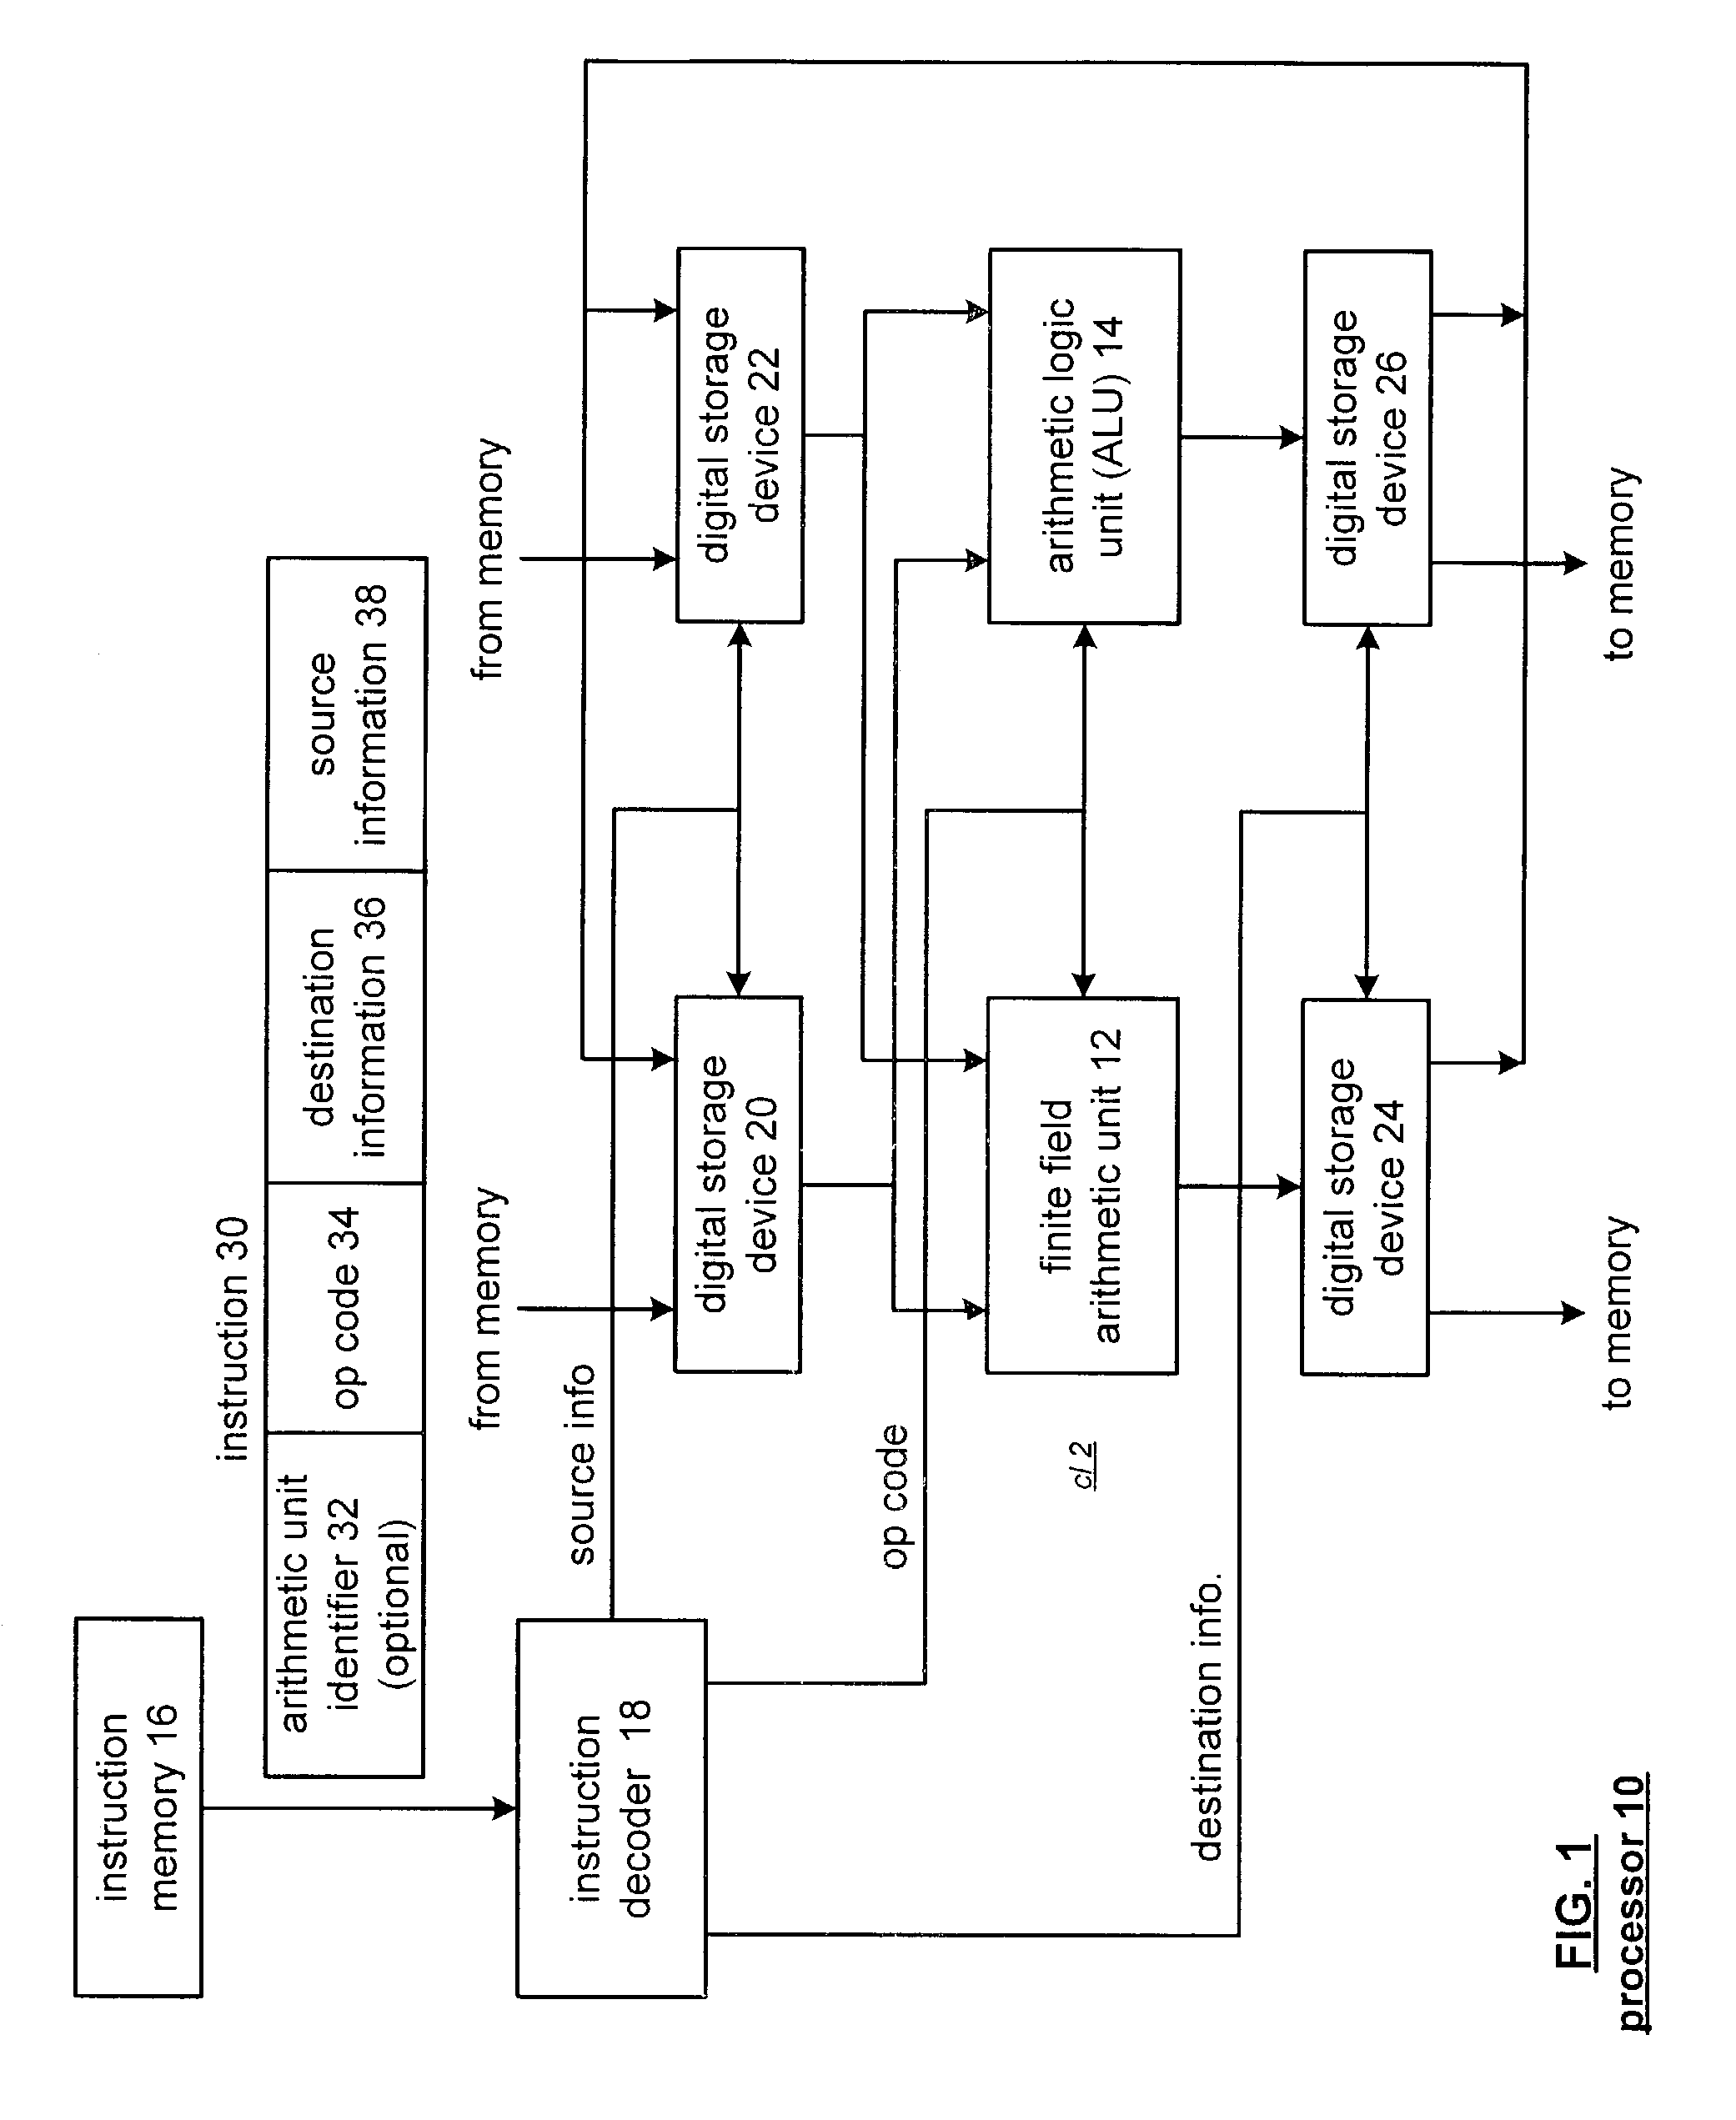 Processor having a finite field arithmetic unit utilizing an array of multipliers and adders